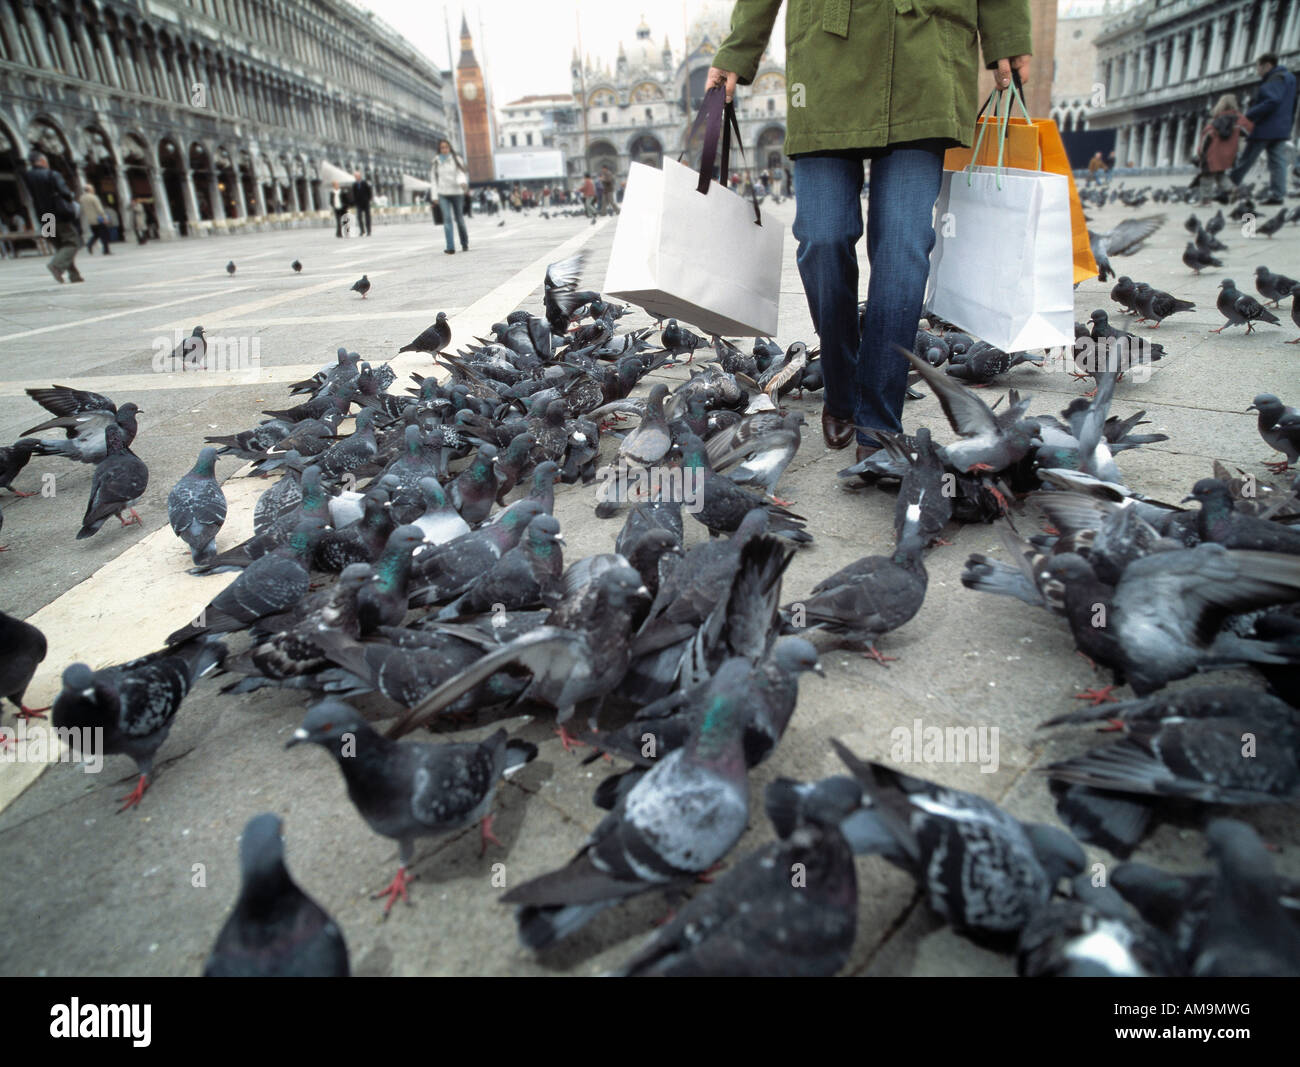 Woman with shopping bags walking through group of pigeons. Stock Photo